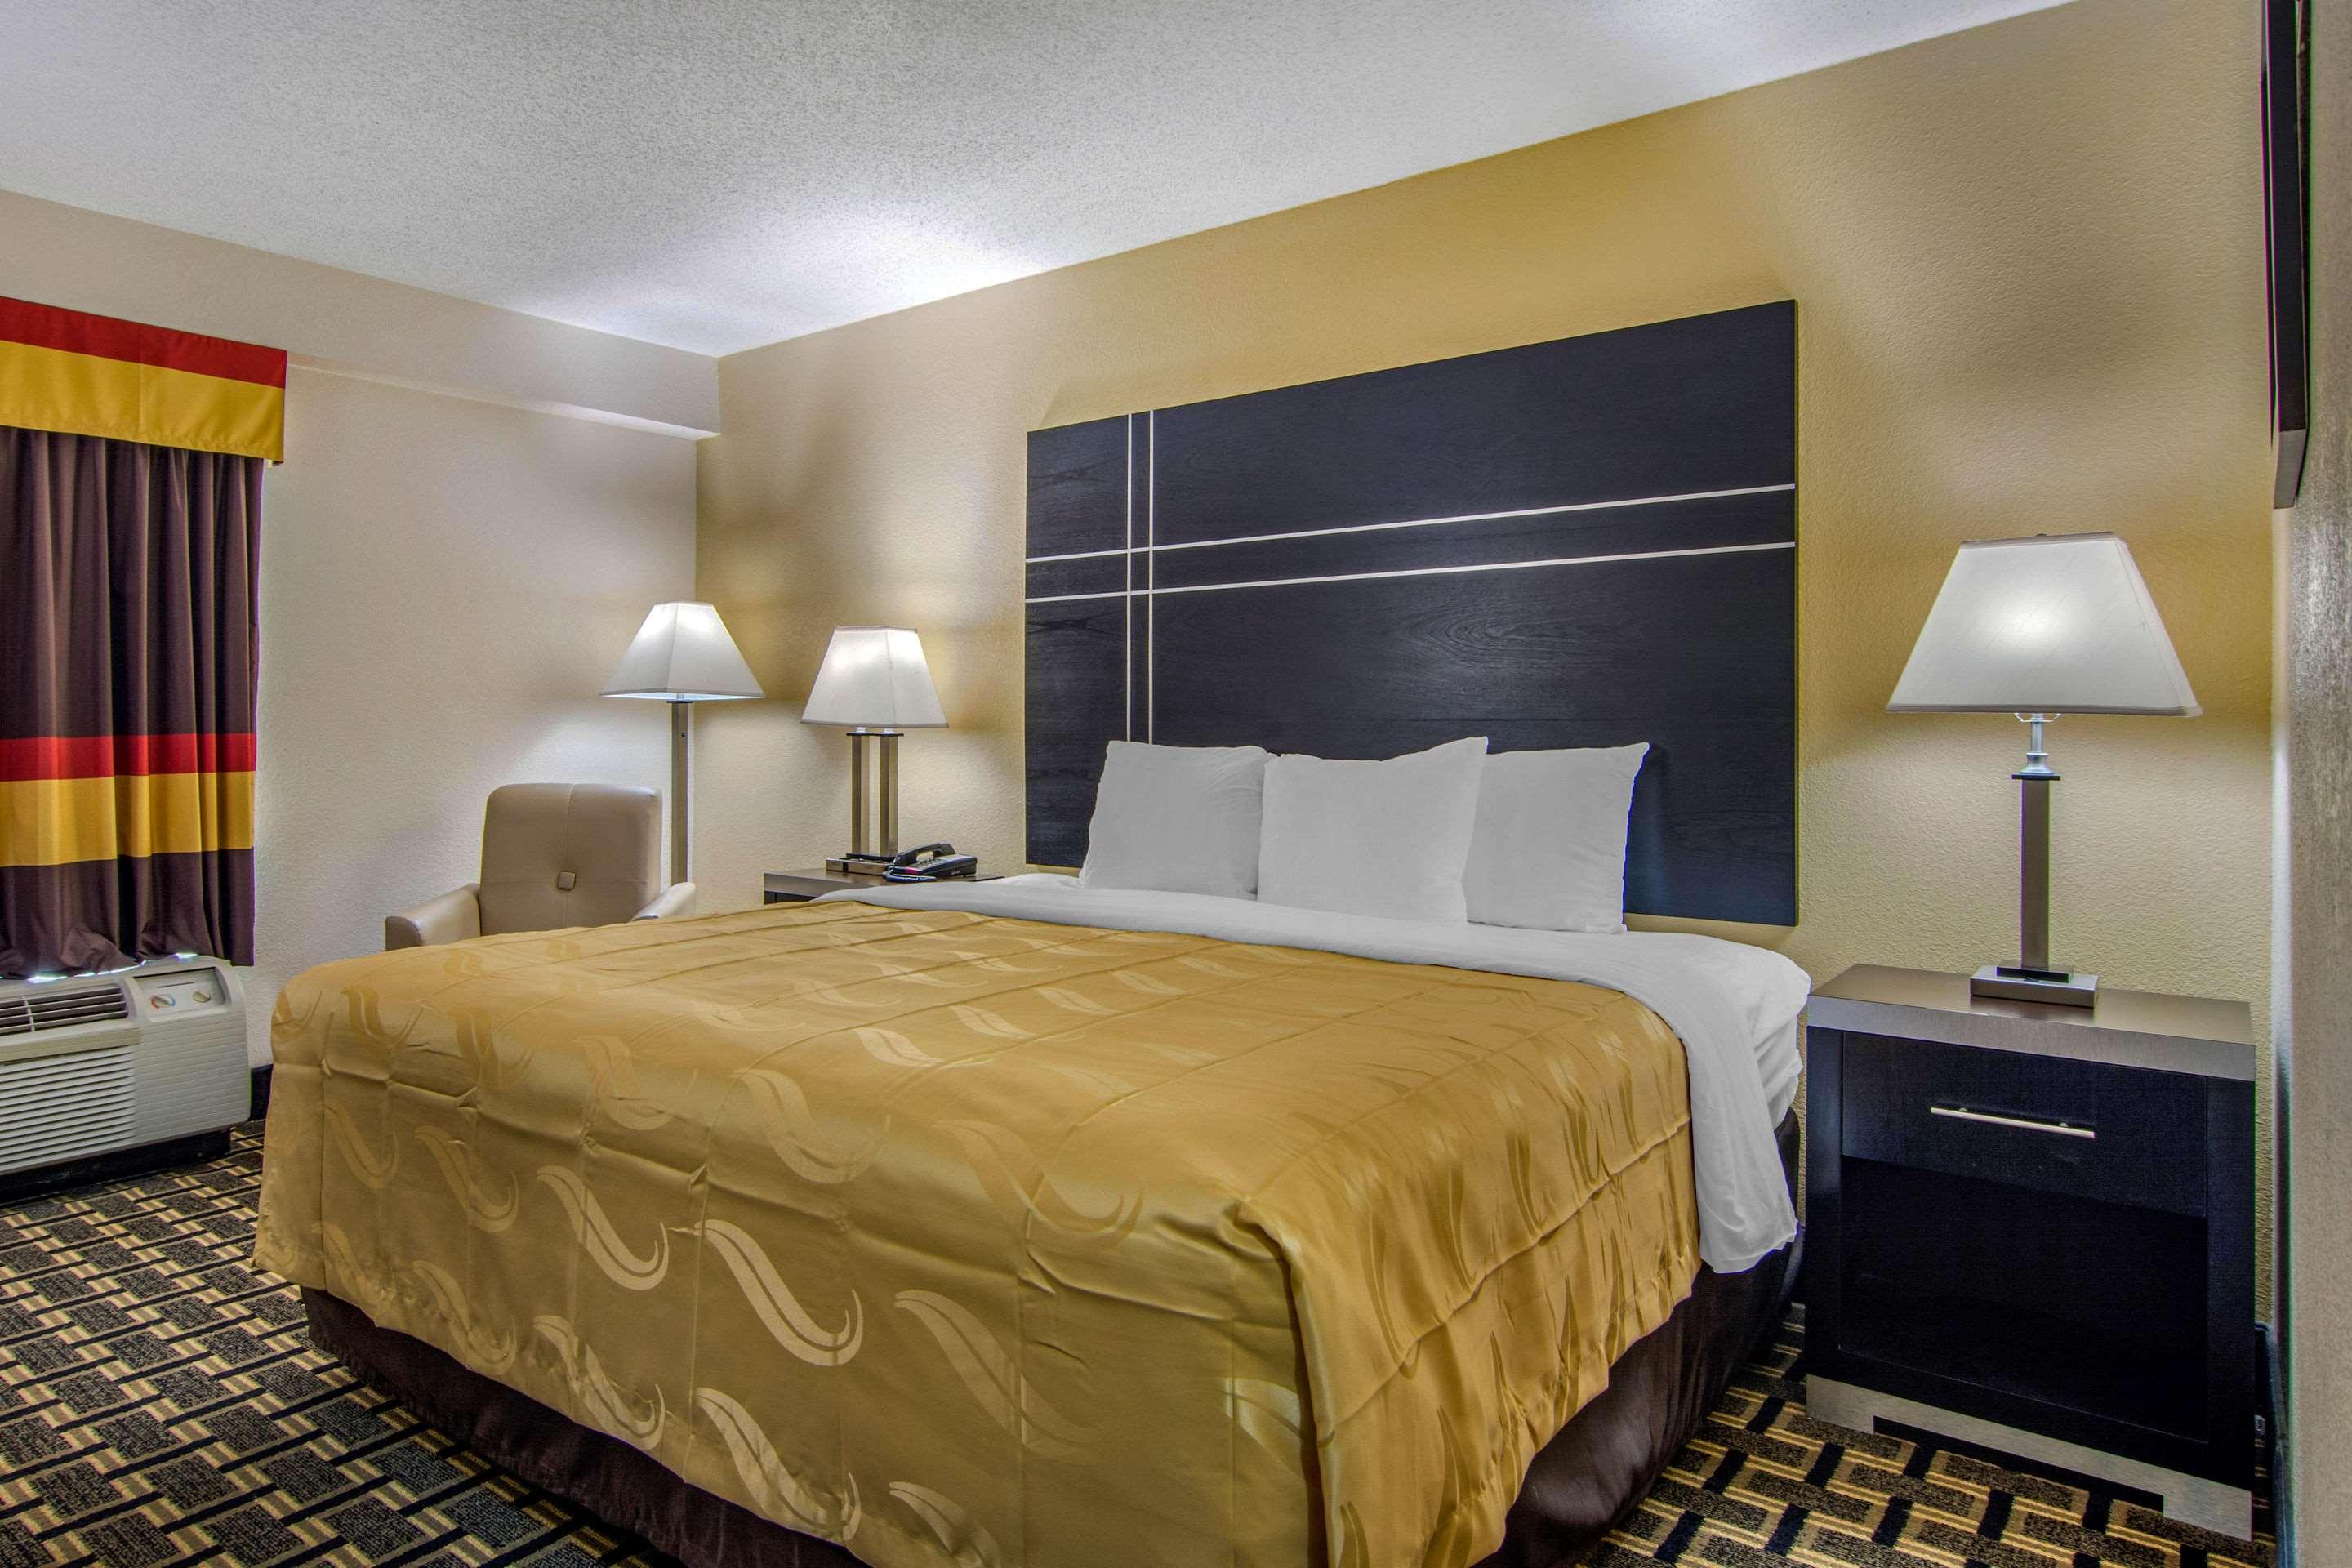 Quality Inn Union City - Atlanta South in Union City, the United States  from $77: Deals, Reviews, Photos | momondo